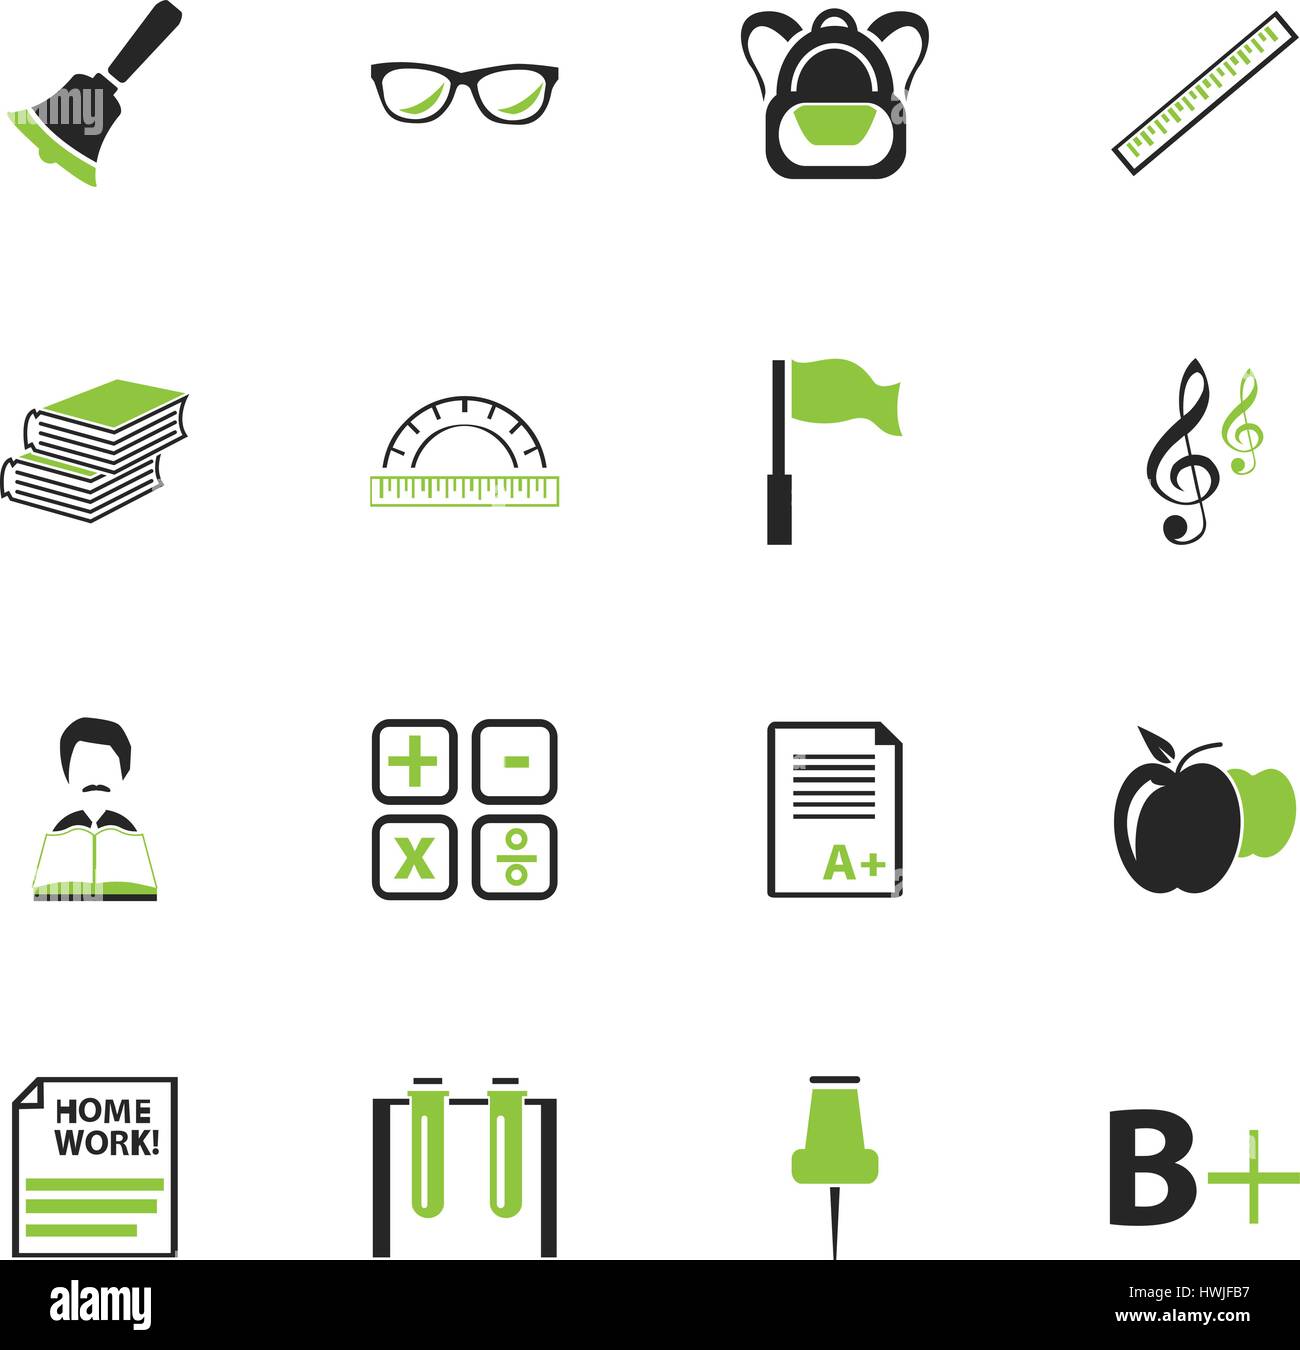 School simply icons for web and user interfaces Stock Vector